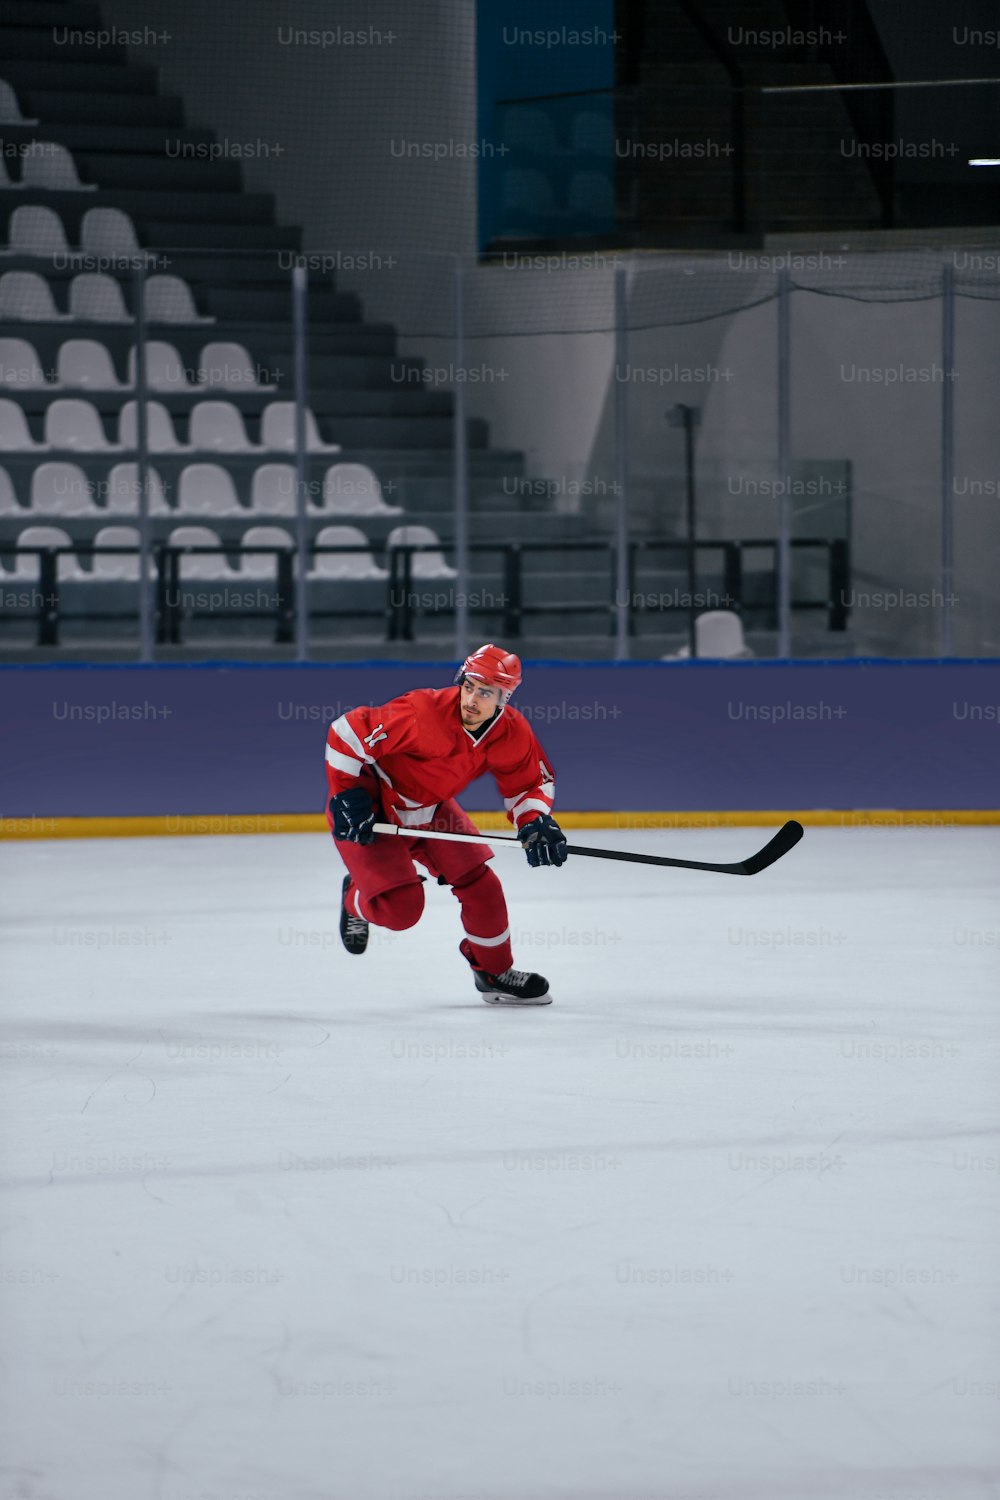 a man in a red hockey uniform playing on an ice rink